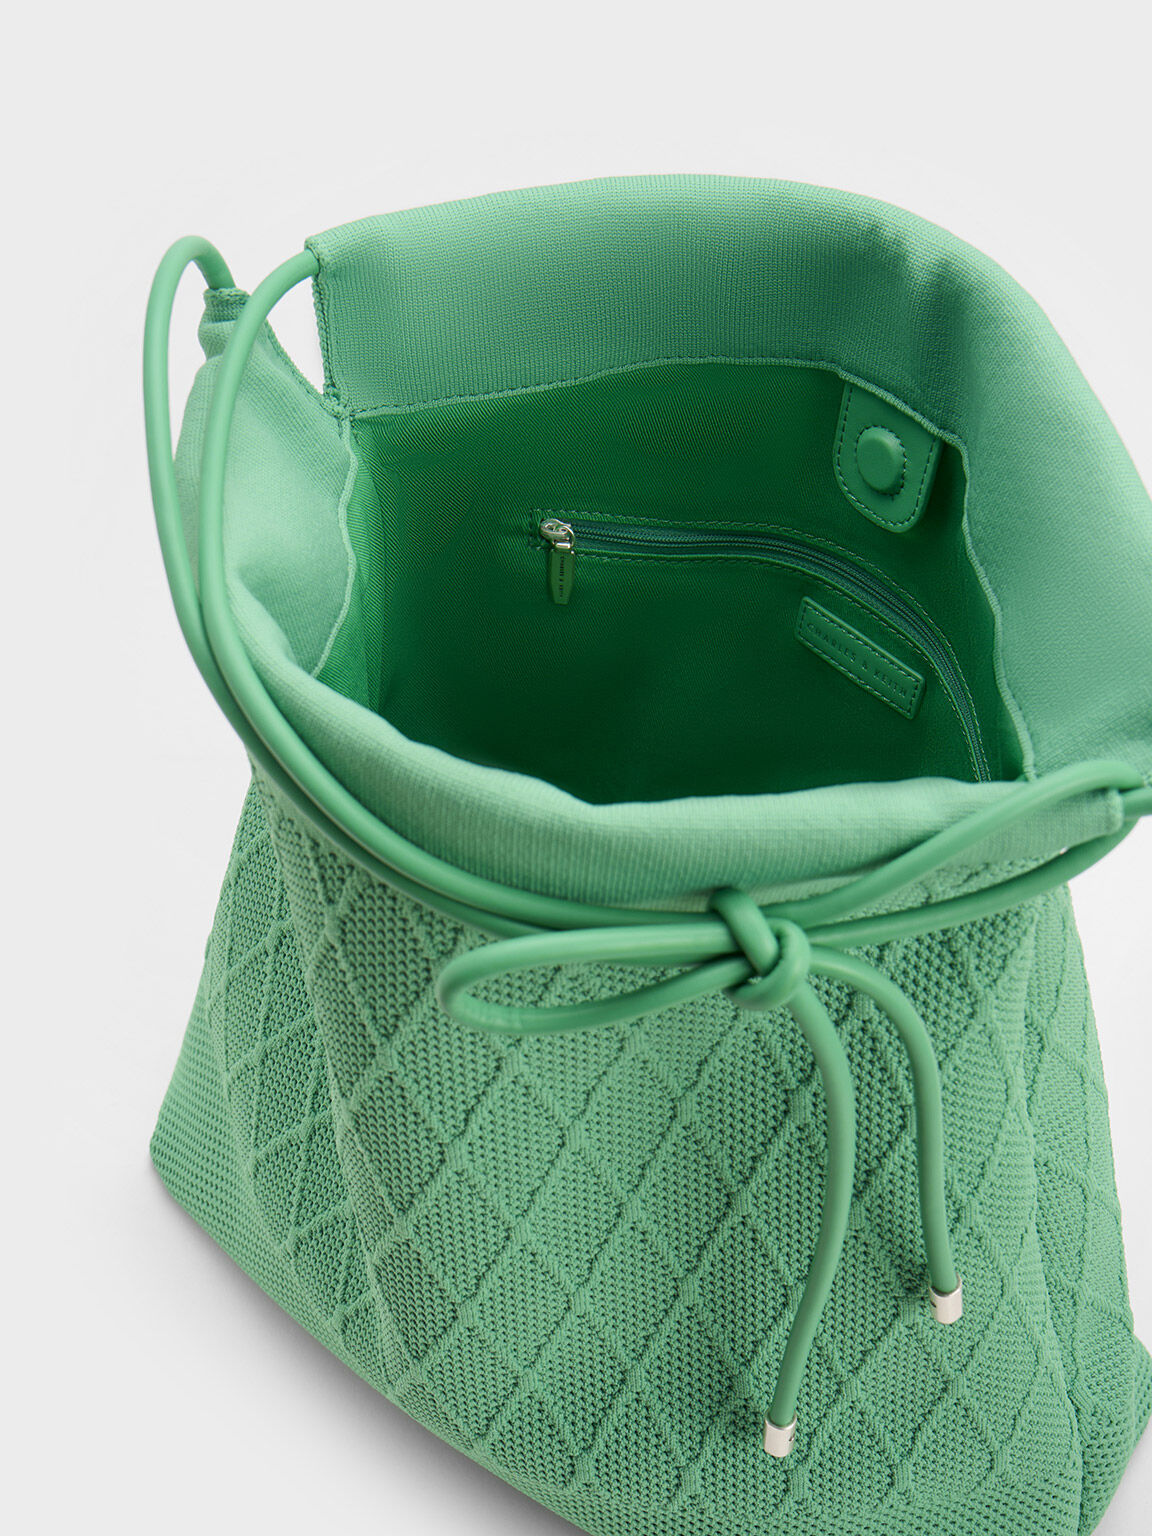 Genoa Bow-Tie Knitted Bag, Green, hi-res